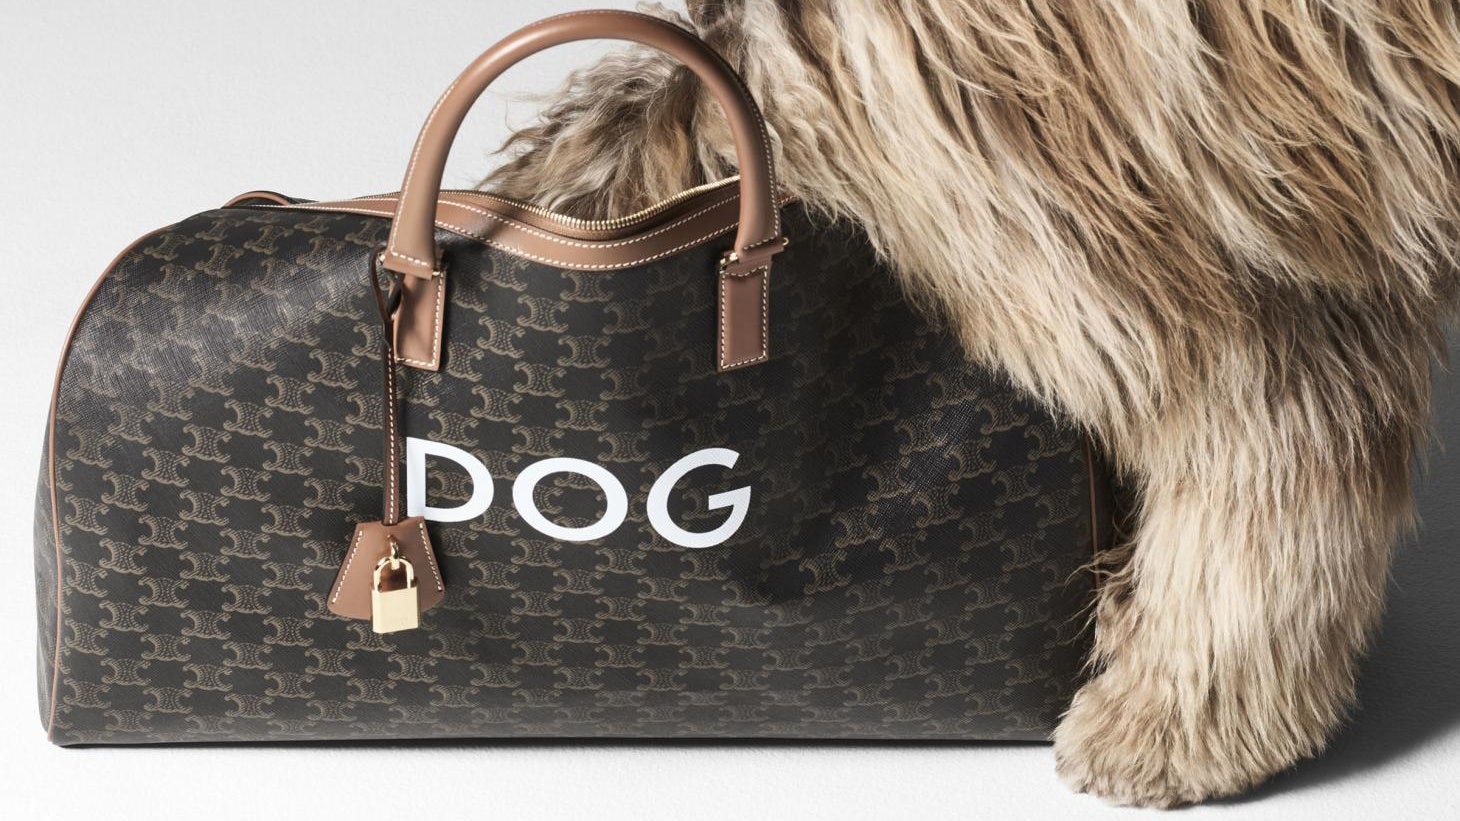 Tommy Hilfiger and Celine are the latest names to launch pet accessories lines. How lucrative is the domestic “chongwu” economy? Photo: Celine